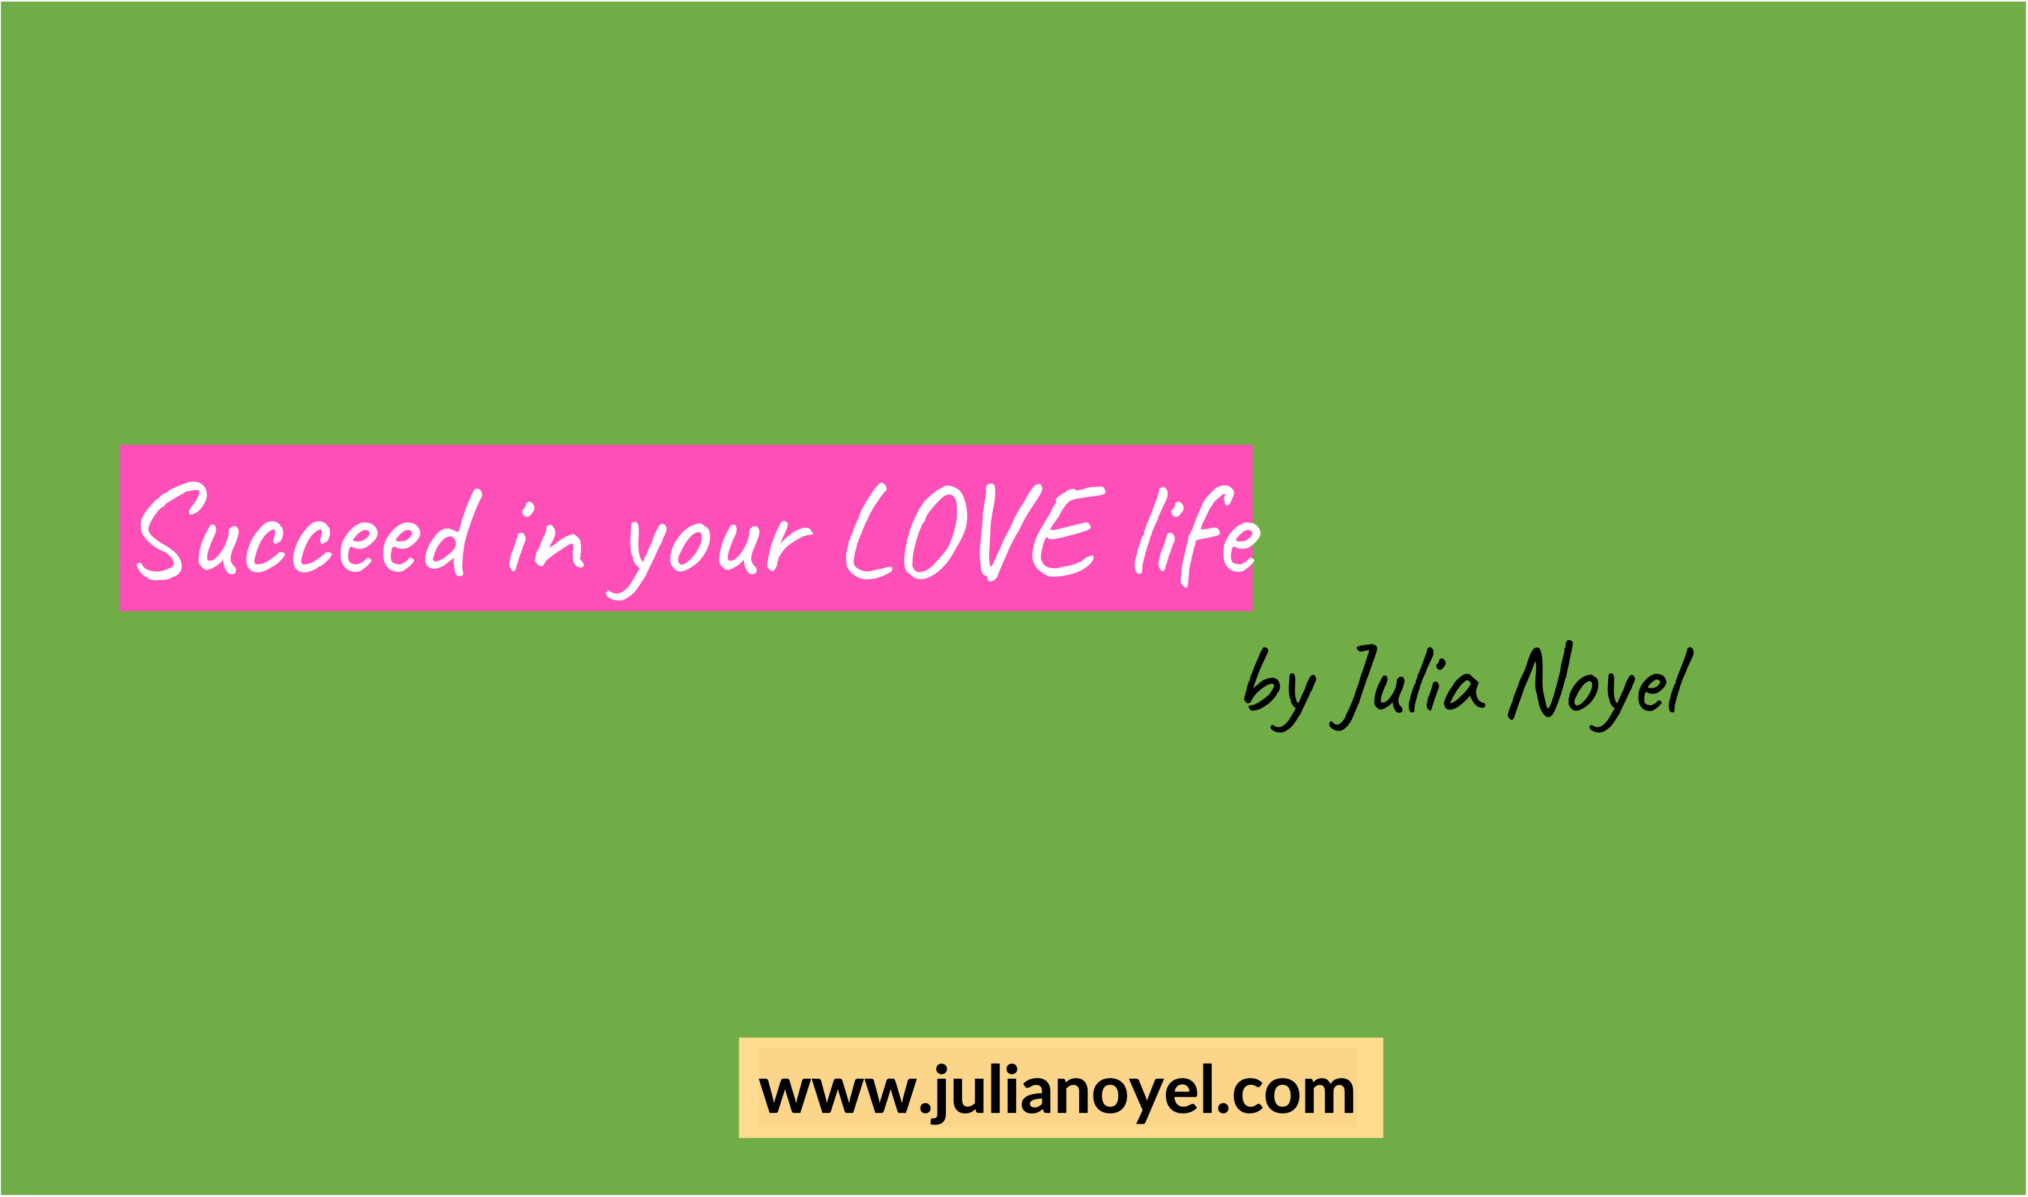 Succeed in your LOVE life by Julia Noyel